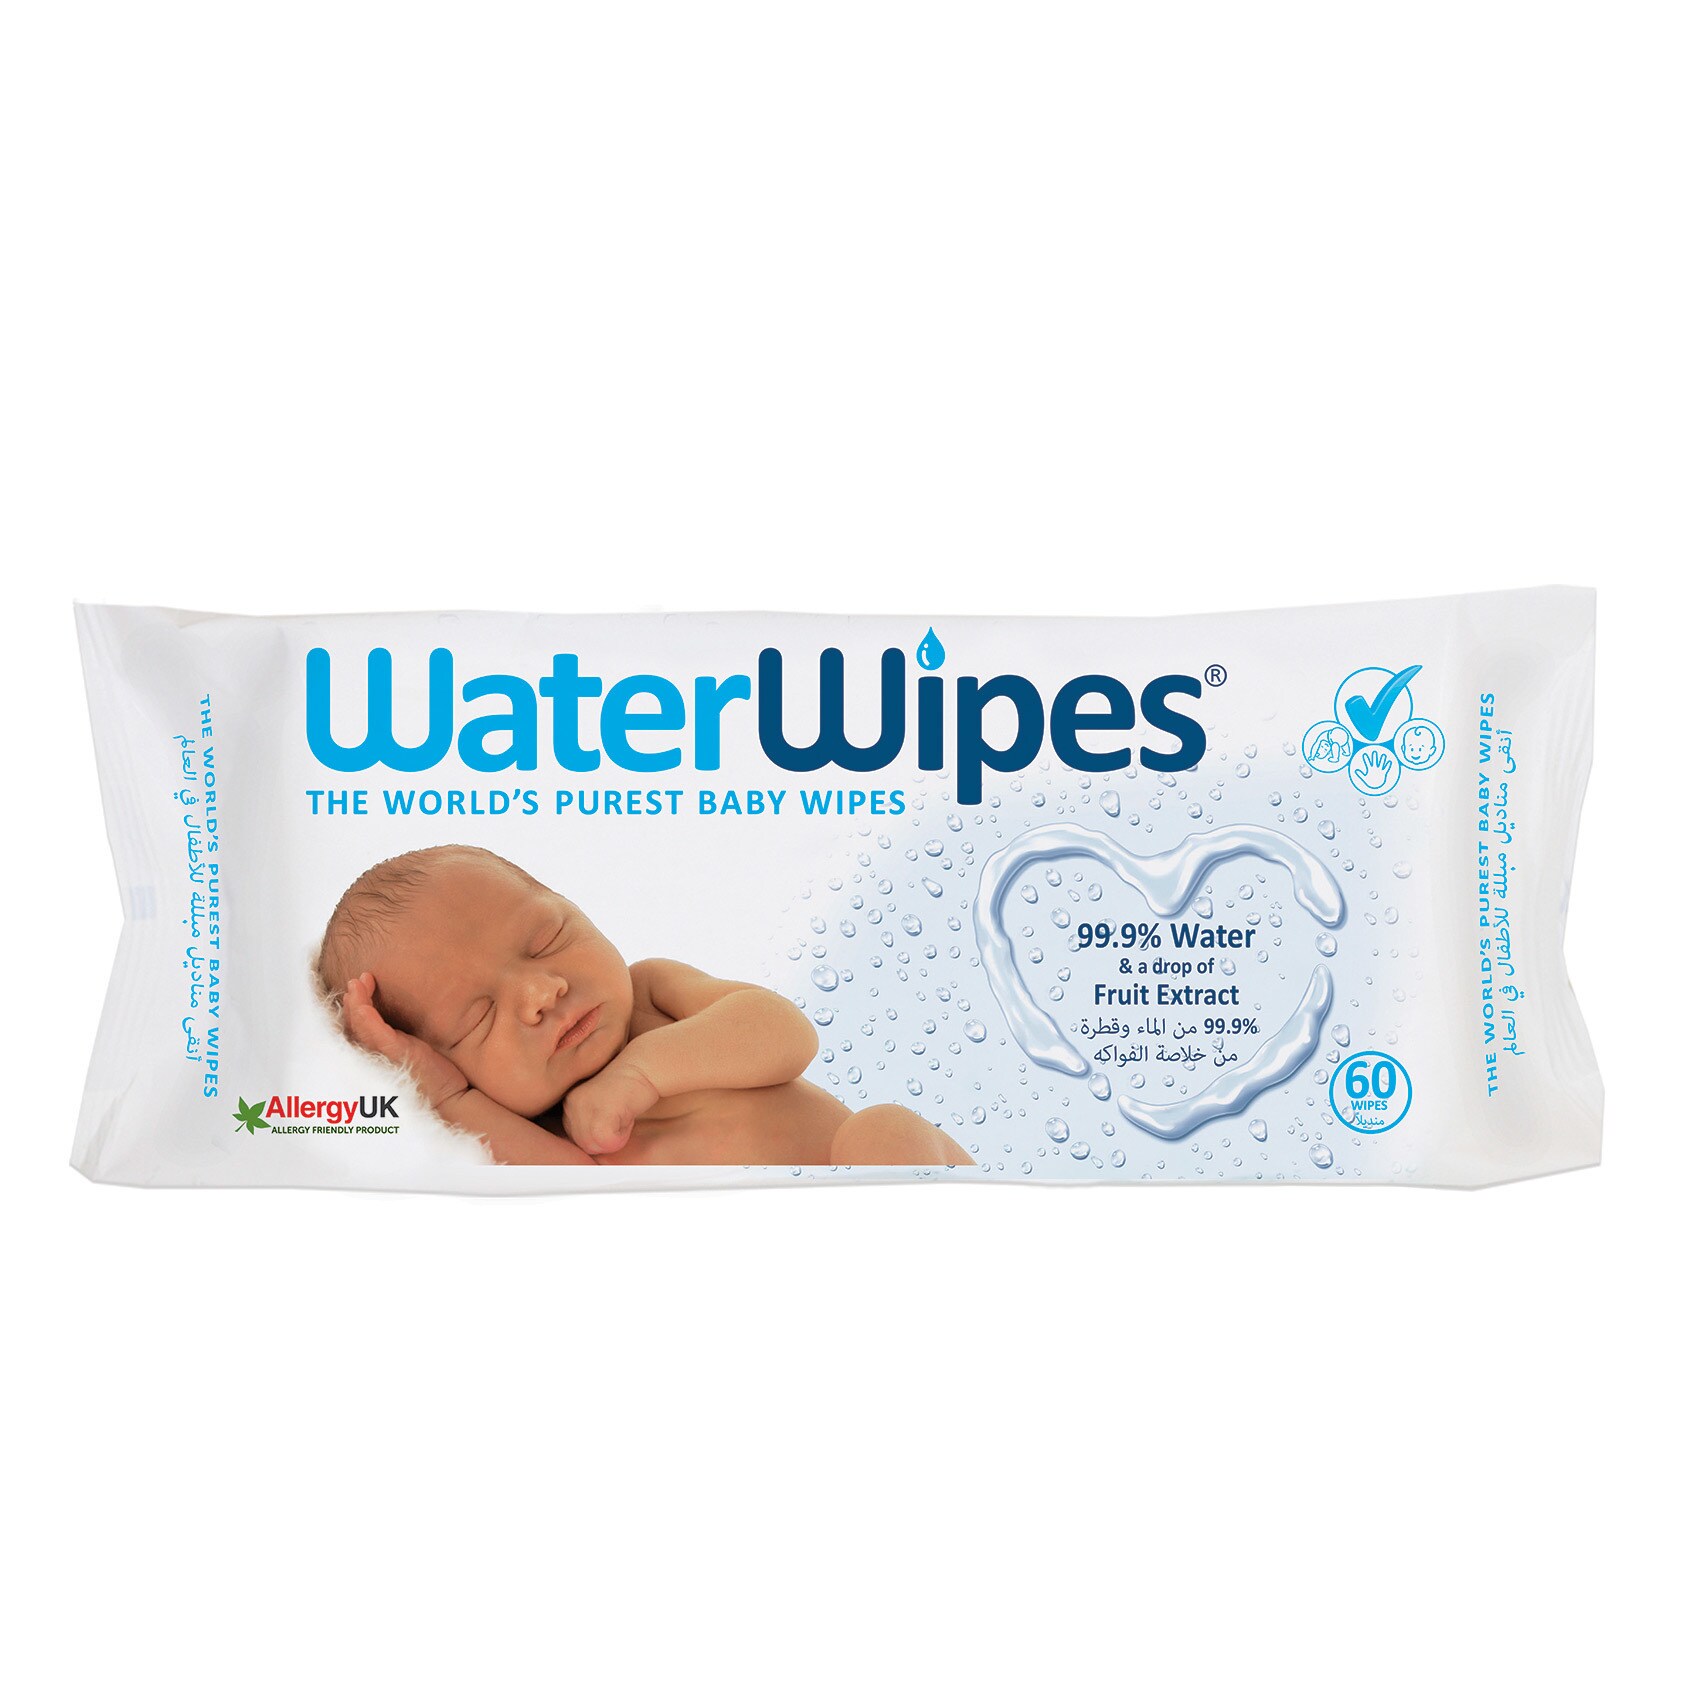 waterwipes online